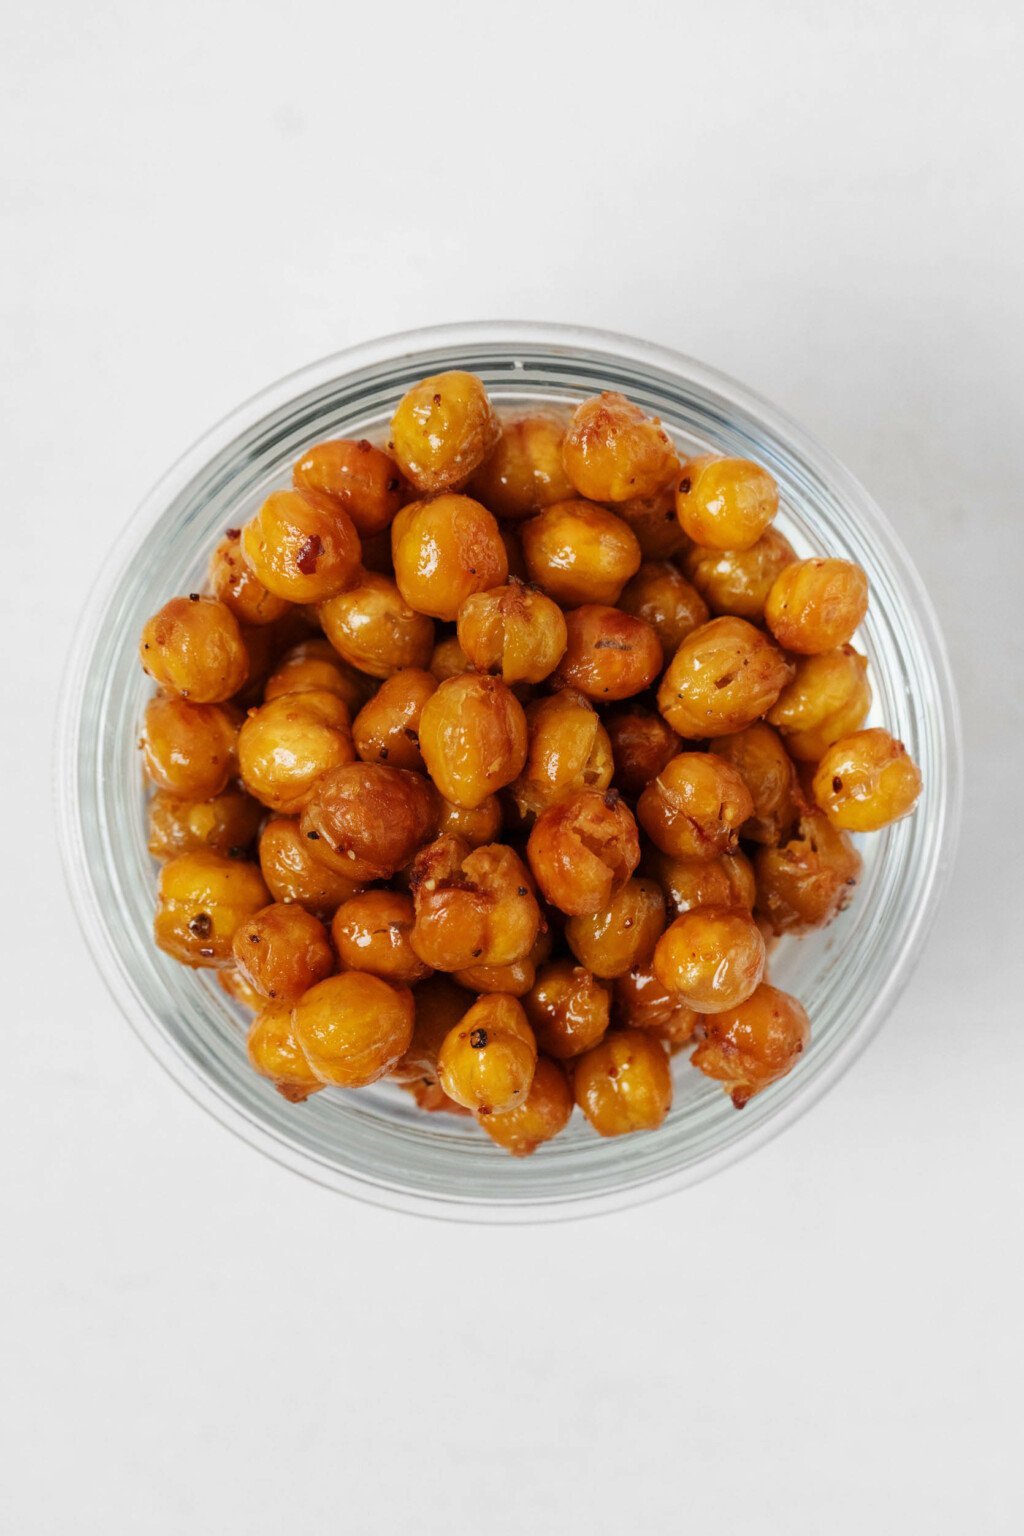 A round, glass mason jar holds crispy roasted chickpeas. It rests on a white surface.